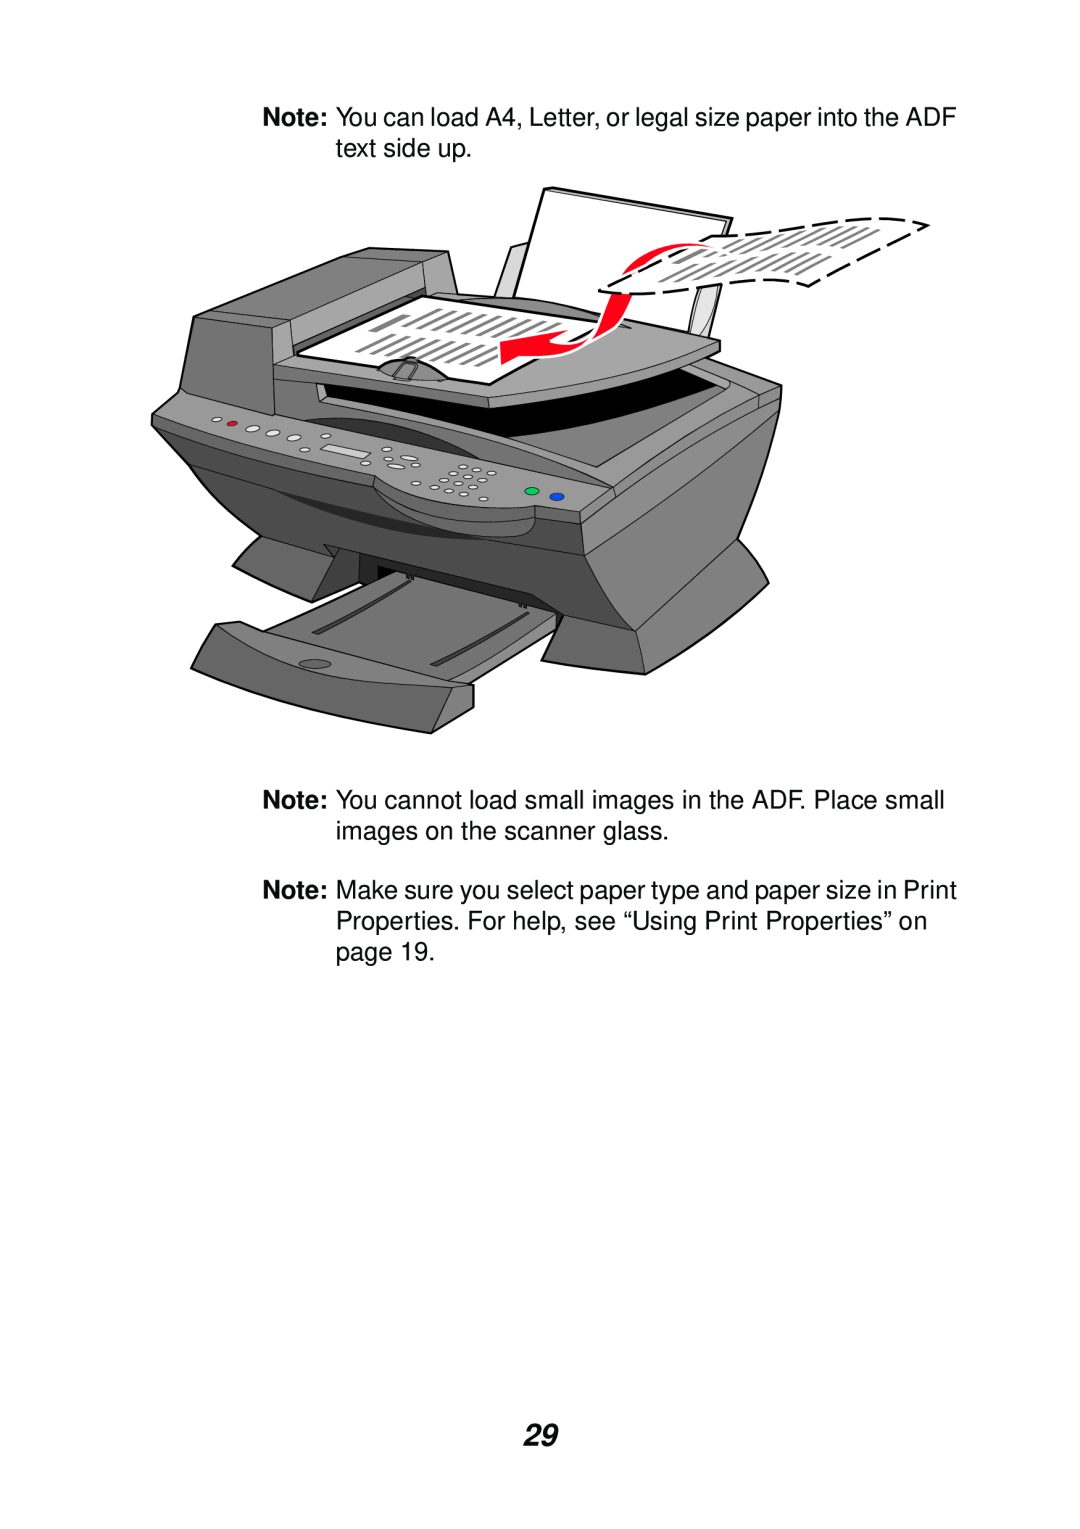 Lexmark X6100 manual Note: You can load A4, Letter, or legal size paper into the ADF text side up 